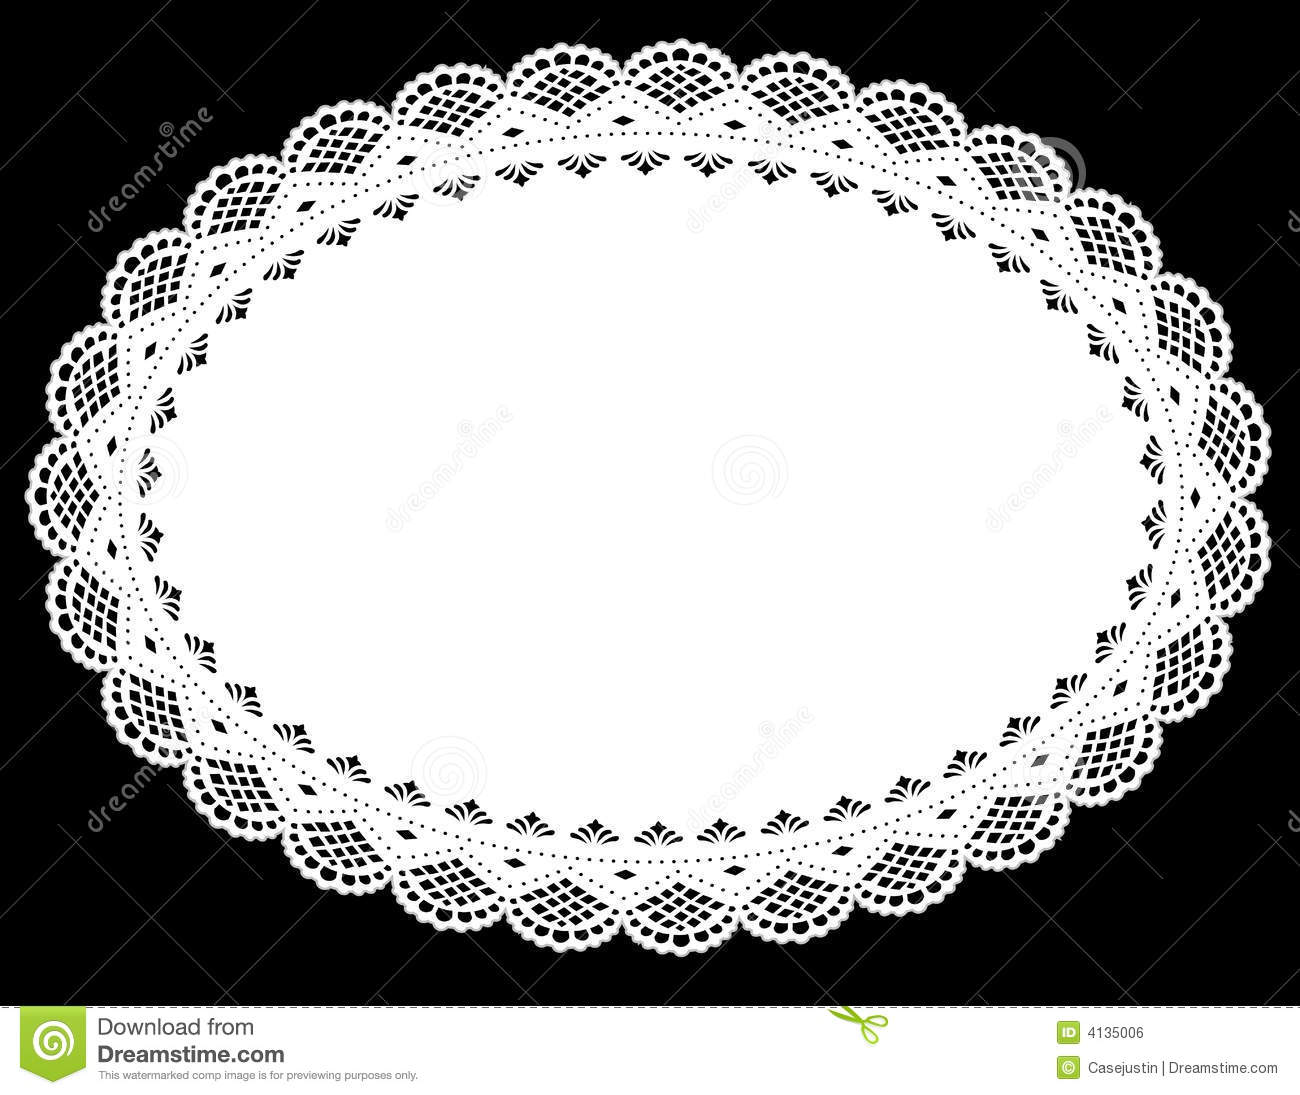 Oval Lace Doily Place Mat Royalty Free Stock Image   Image  4135006